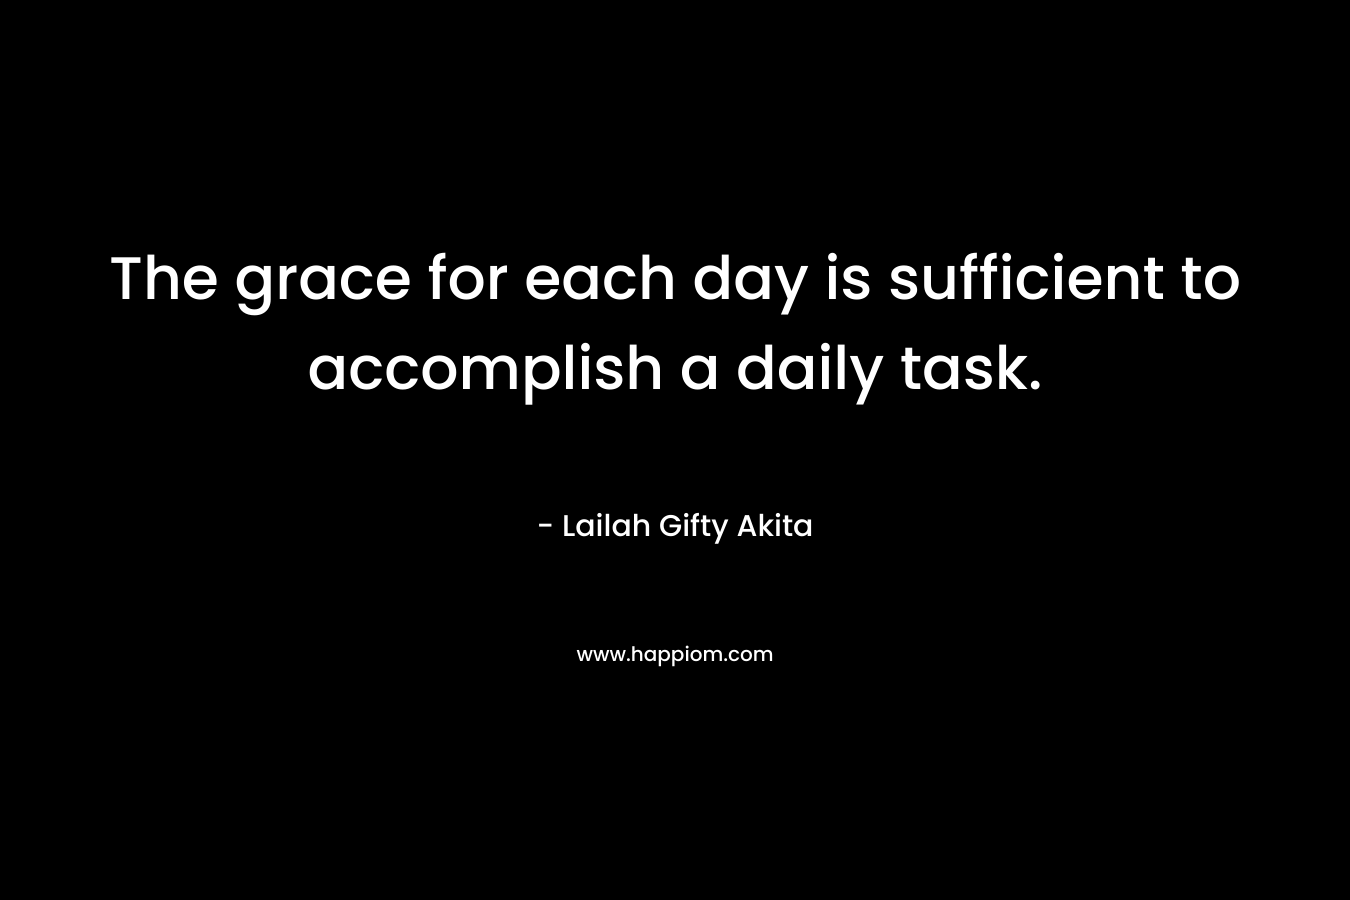 The grace for each day is sufficient to accomplish a daily task.